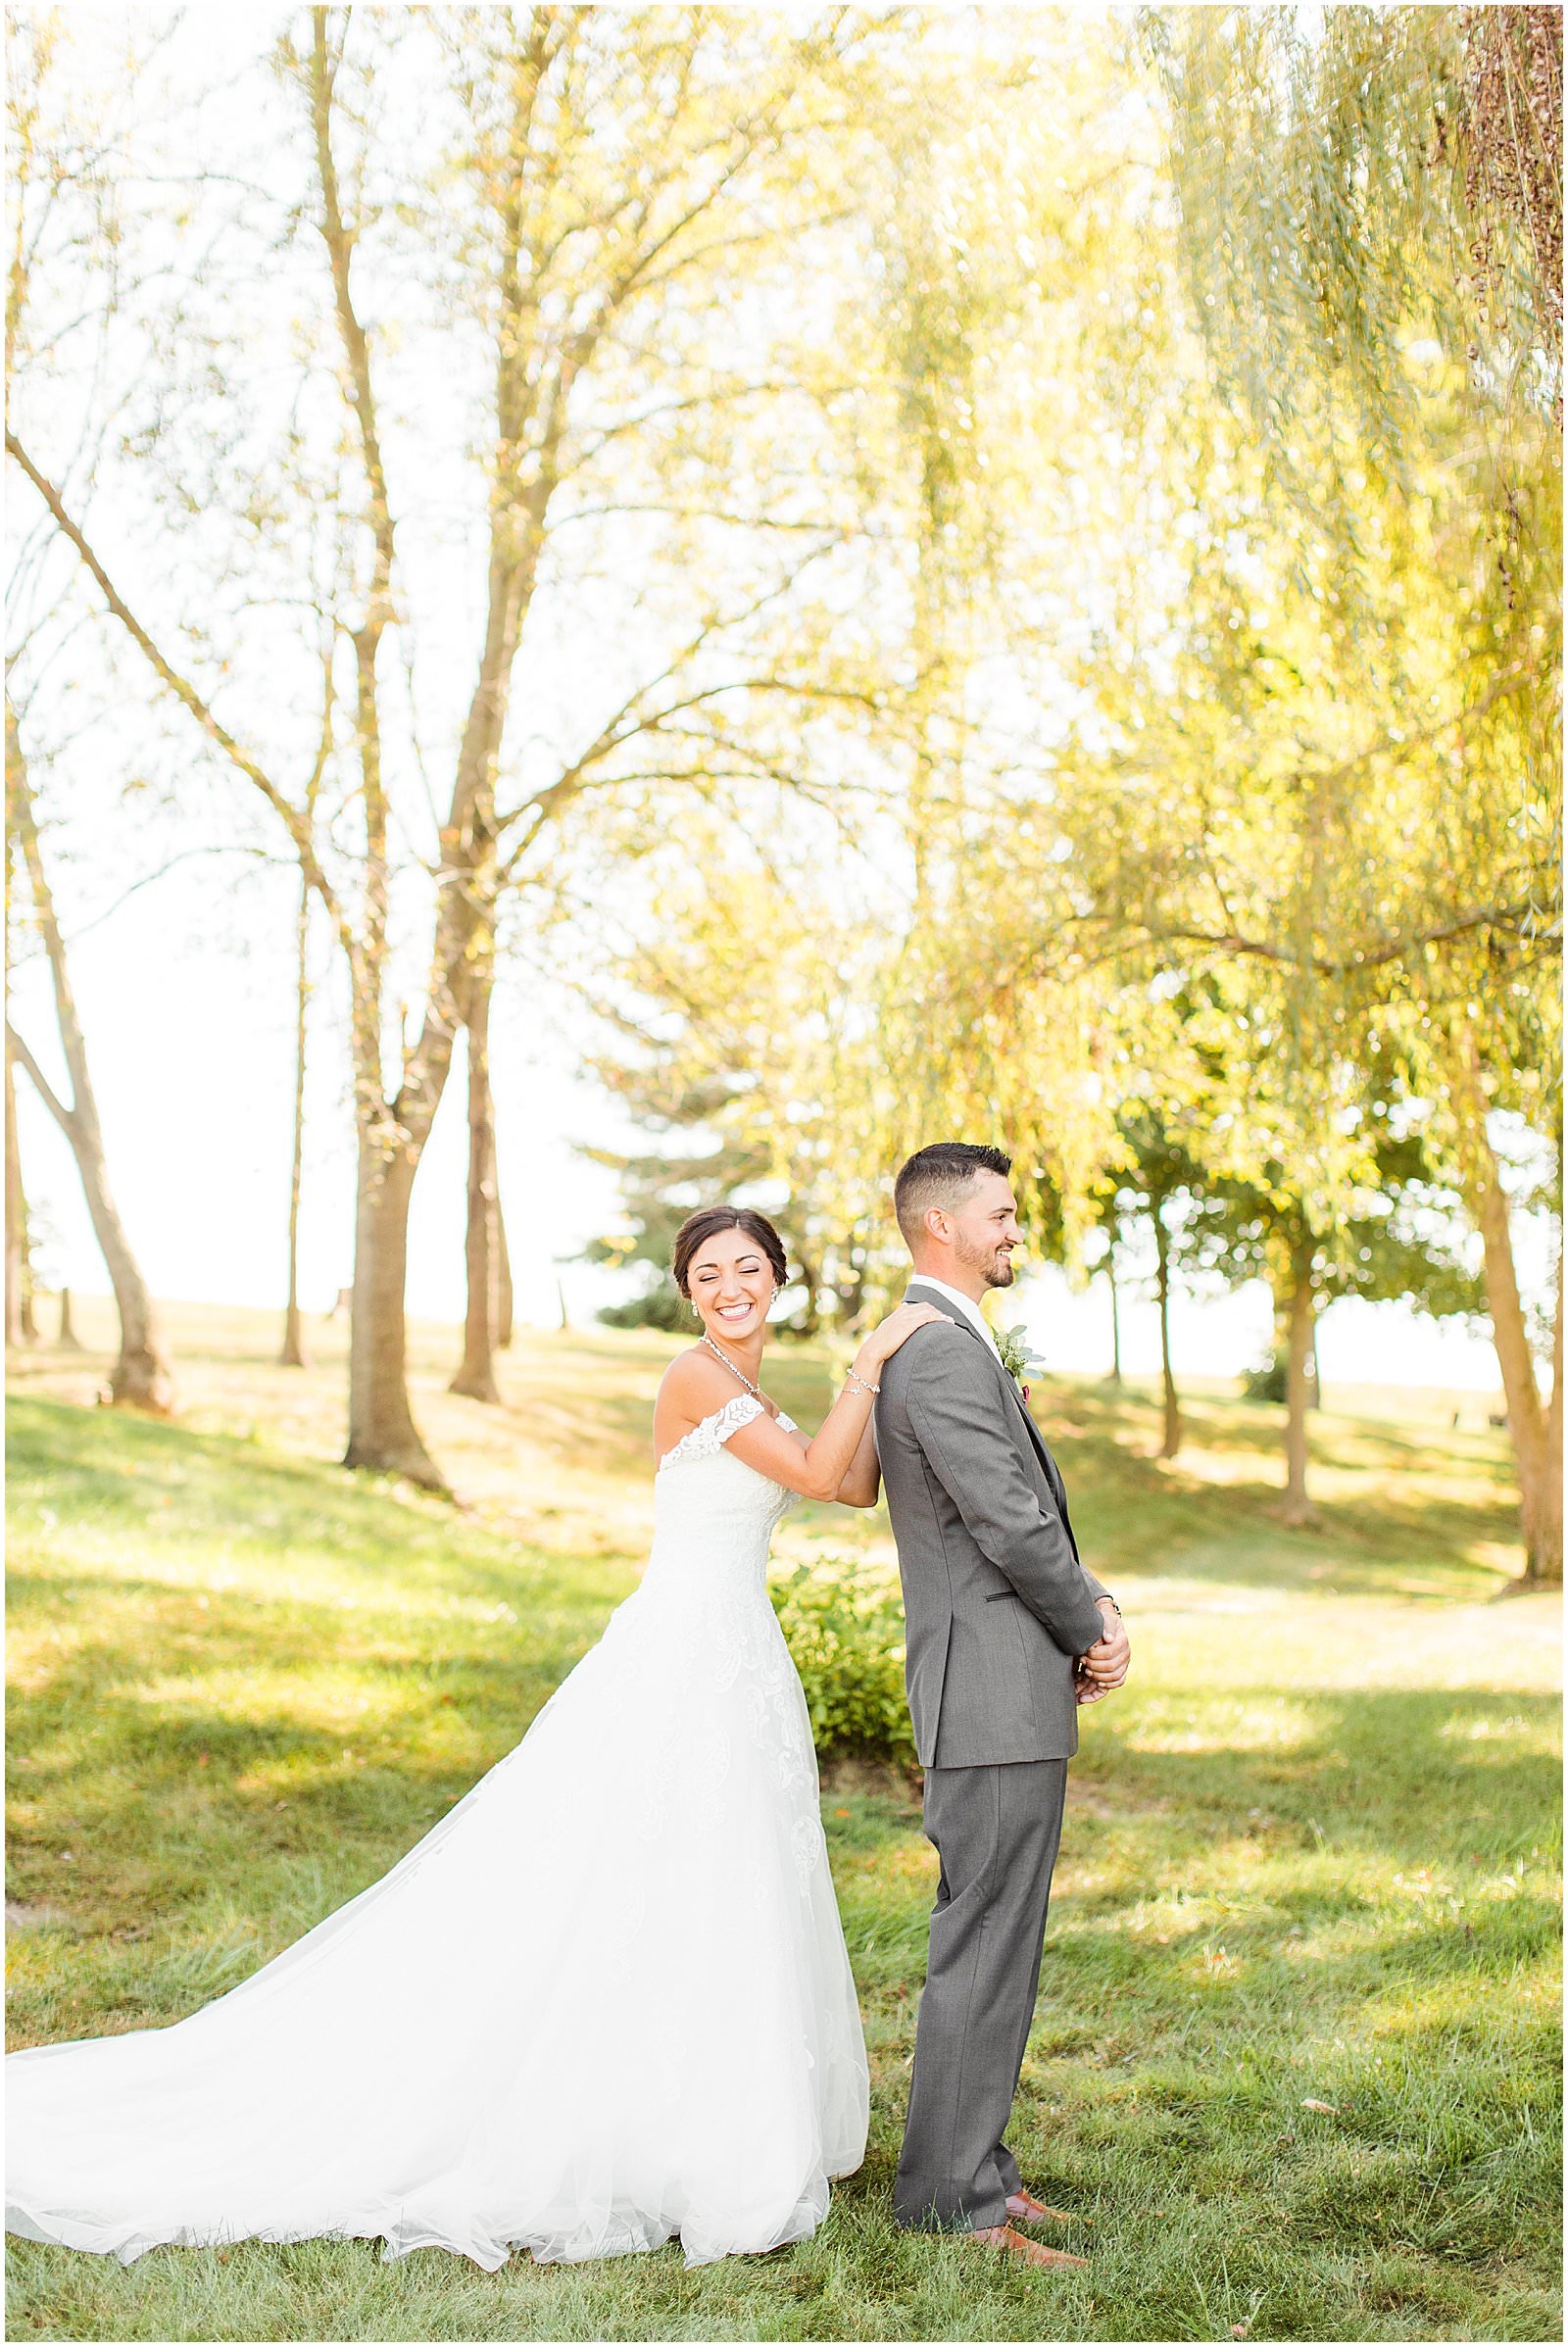 A Stunning Fall Wedding in Indianapolis, IN |. Sally and Andrew | Bret and Brandie Photography 0046.jpg